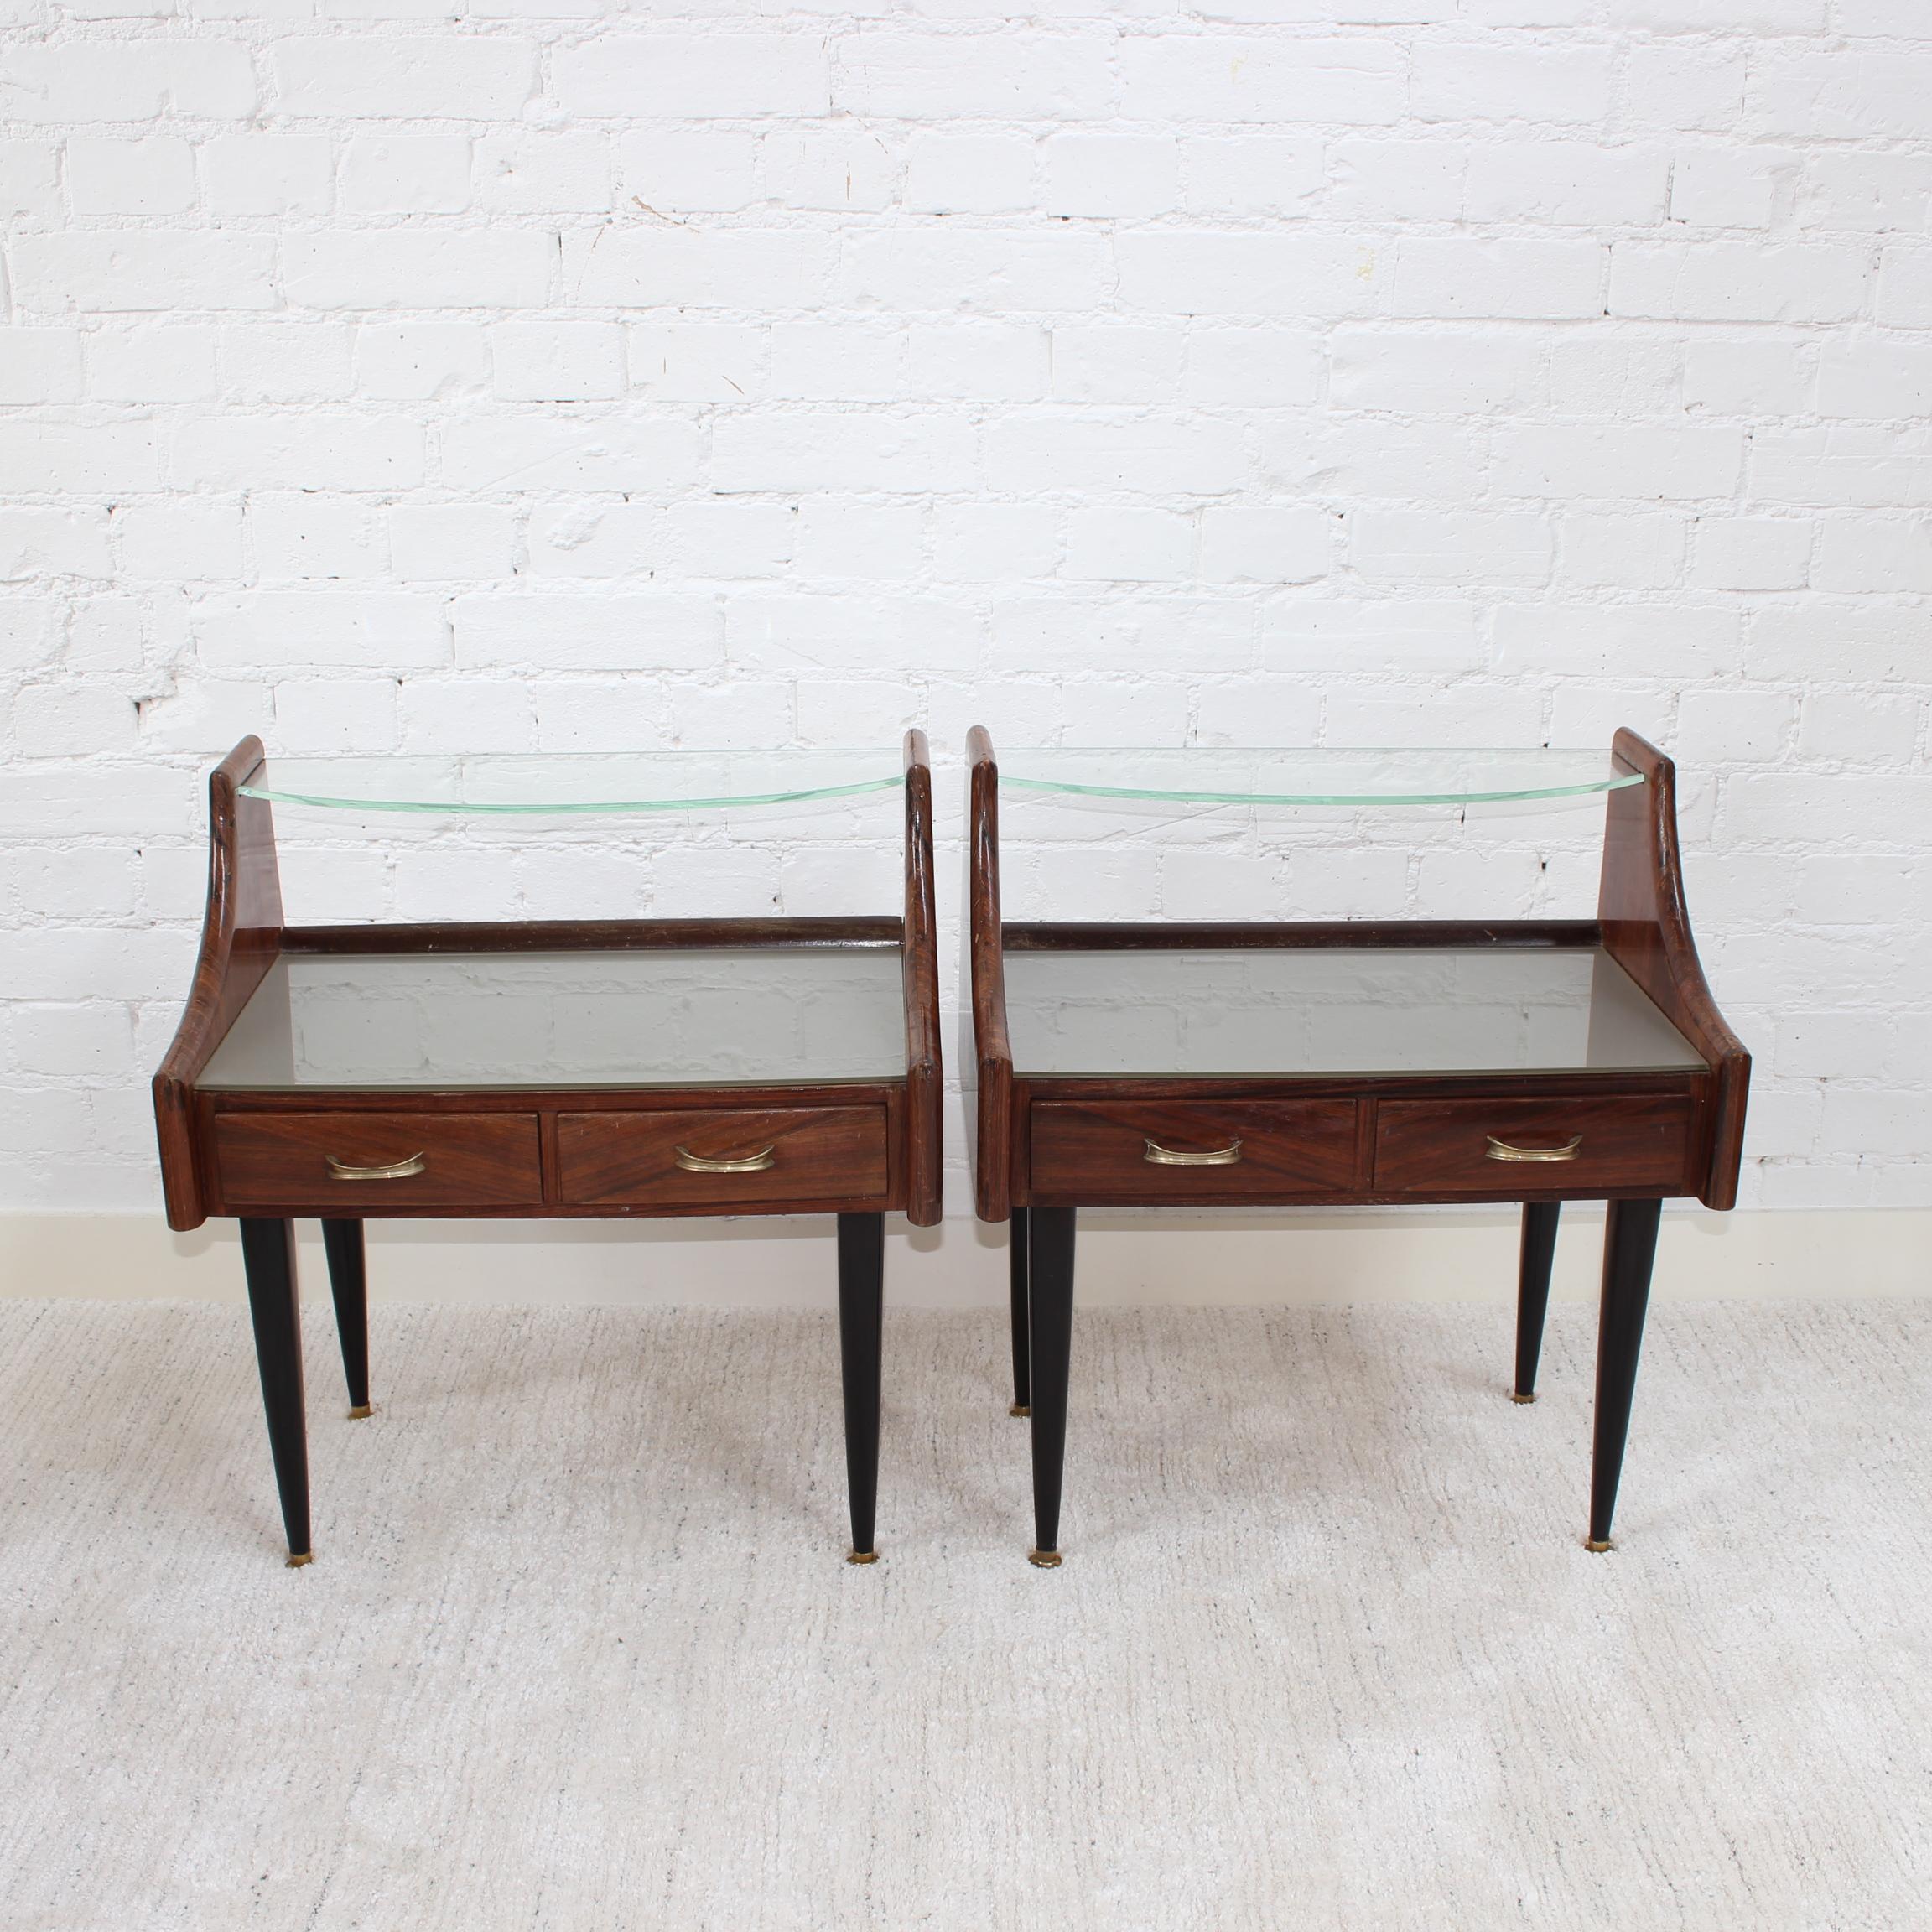 Pair of vintage Italian bedside tables, possibly by Ico Parisi (circa 1950s). Very stylish pieces with slews of character and charm. There are two horizontal surfaces for storage or display with the top made of glass and two small drawers with each